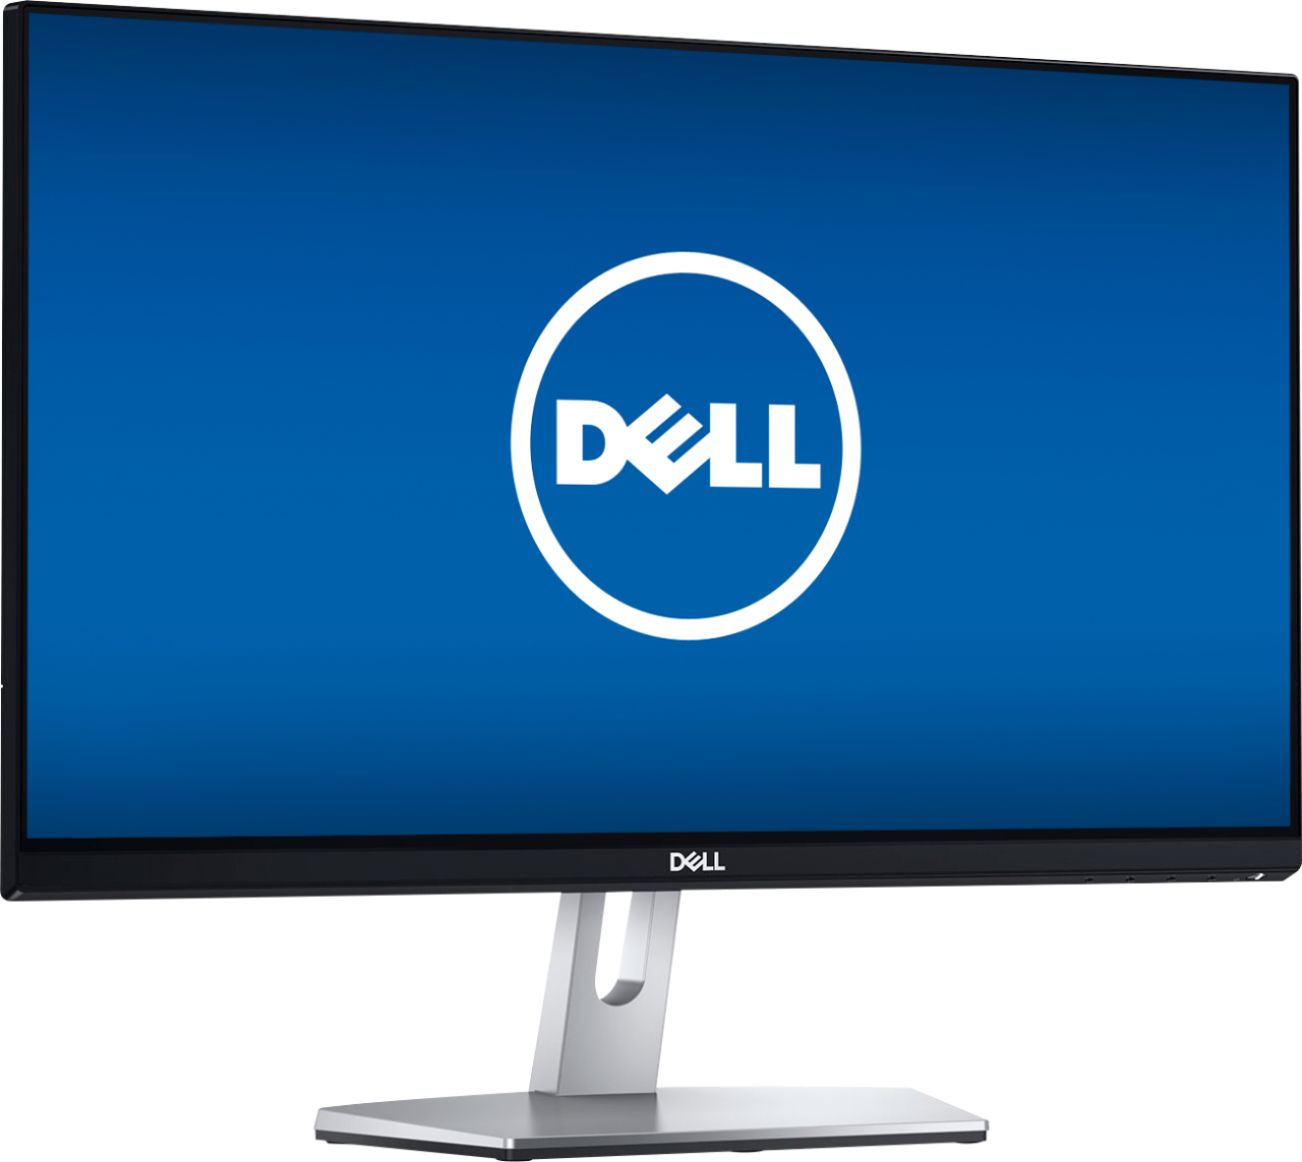 Angle View: Dell - Geek Squad Certified Refurbished 23" IPS LED FHD Monitor - Black/Silver